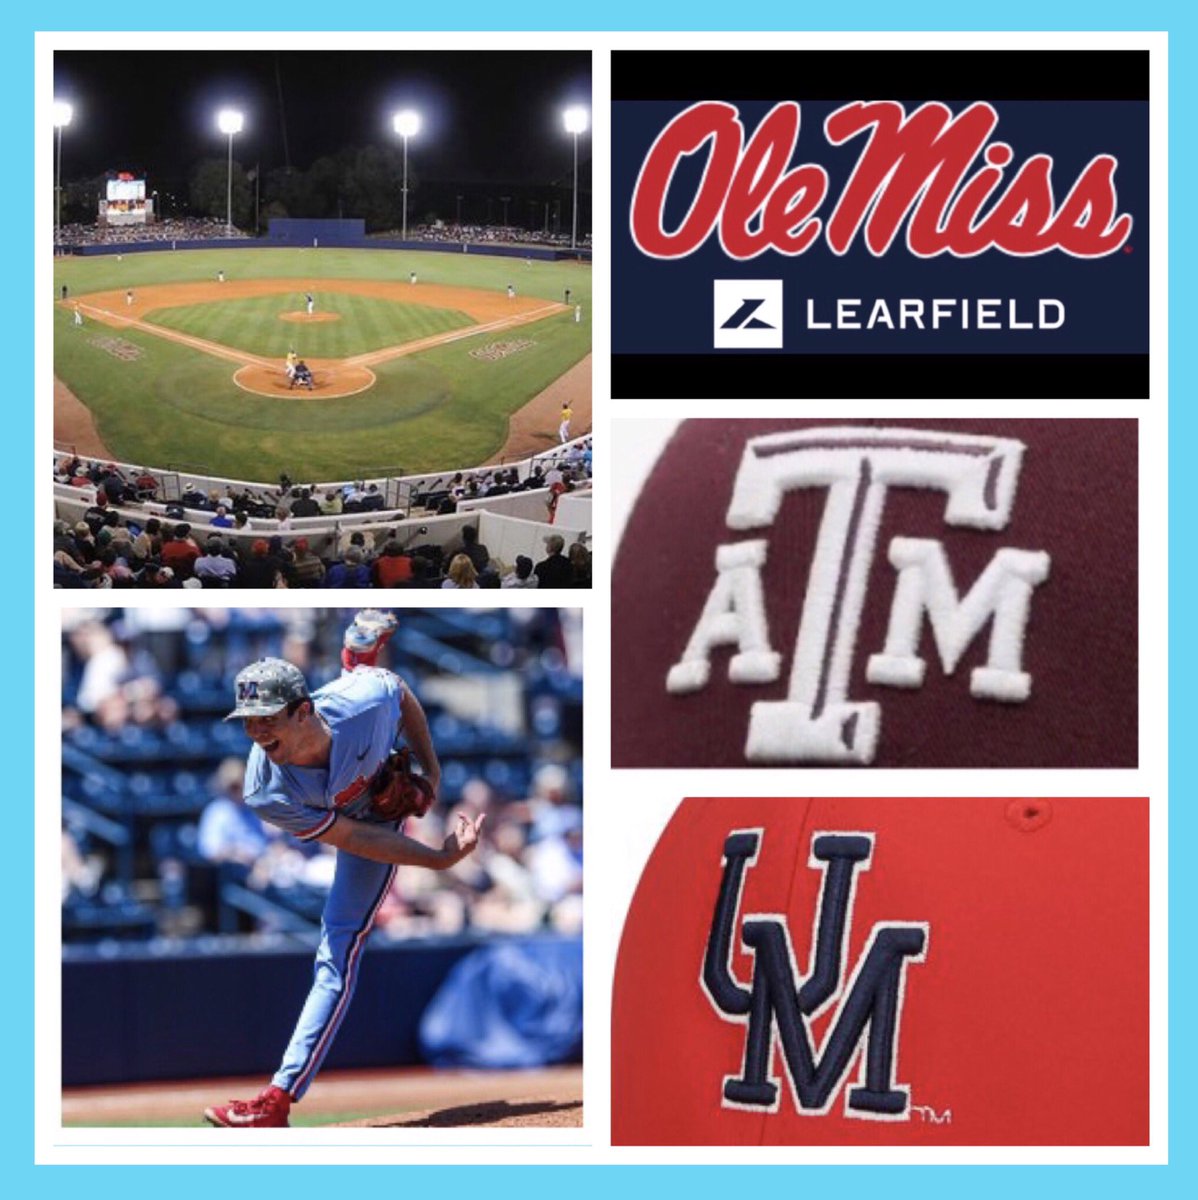 We’ve got Sunday night baseball at Swayze as @OleMissBSB goes for the sweep over TXAM. 1st pitch is 5pm & airtime 4:30 on the @OleMissNetwork w/@RebVoice & @HenduReb! Listen🎧⬇️ 📻 Local radio olemisssports.com/sports/2018/7/… 📱 @OleMissSports app 💻 online olemisssports.com/watch?Live=992…